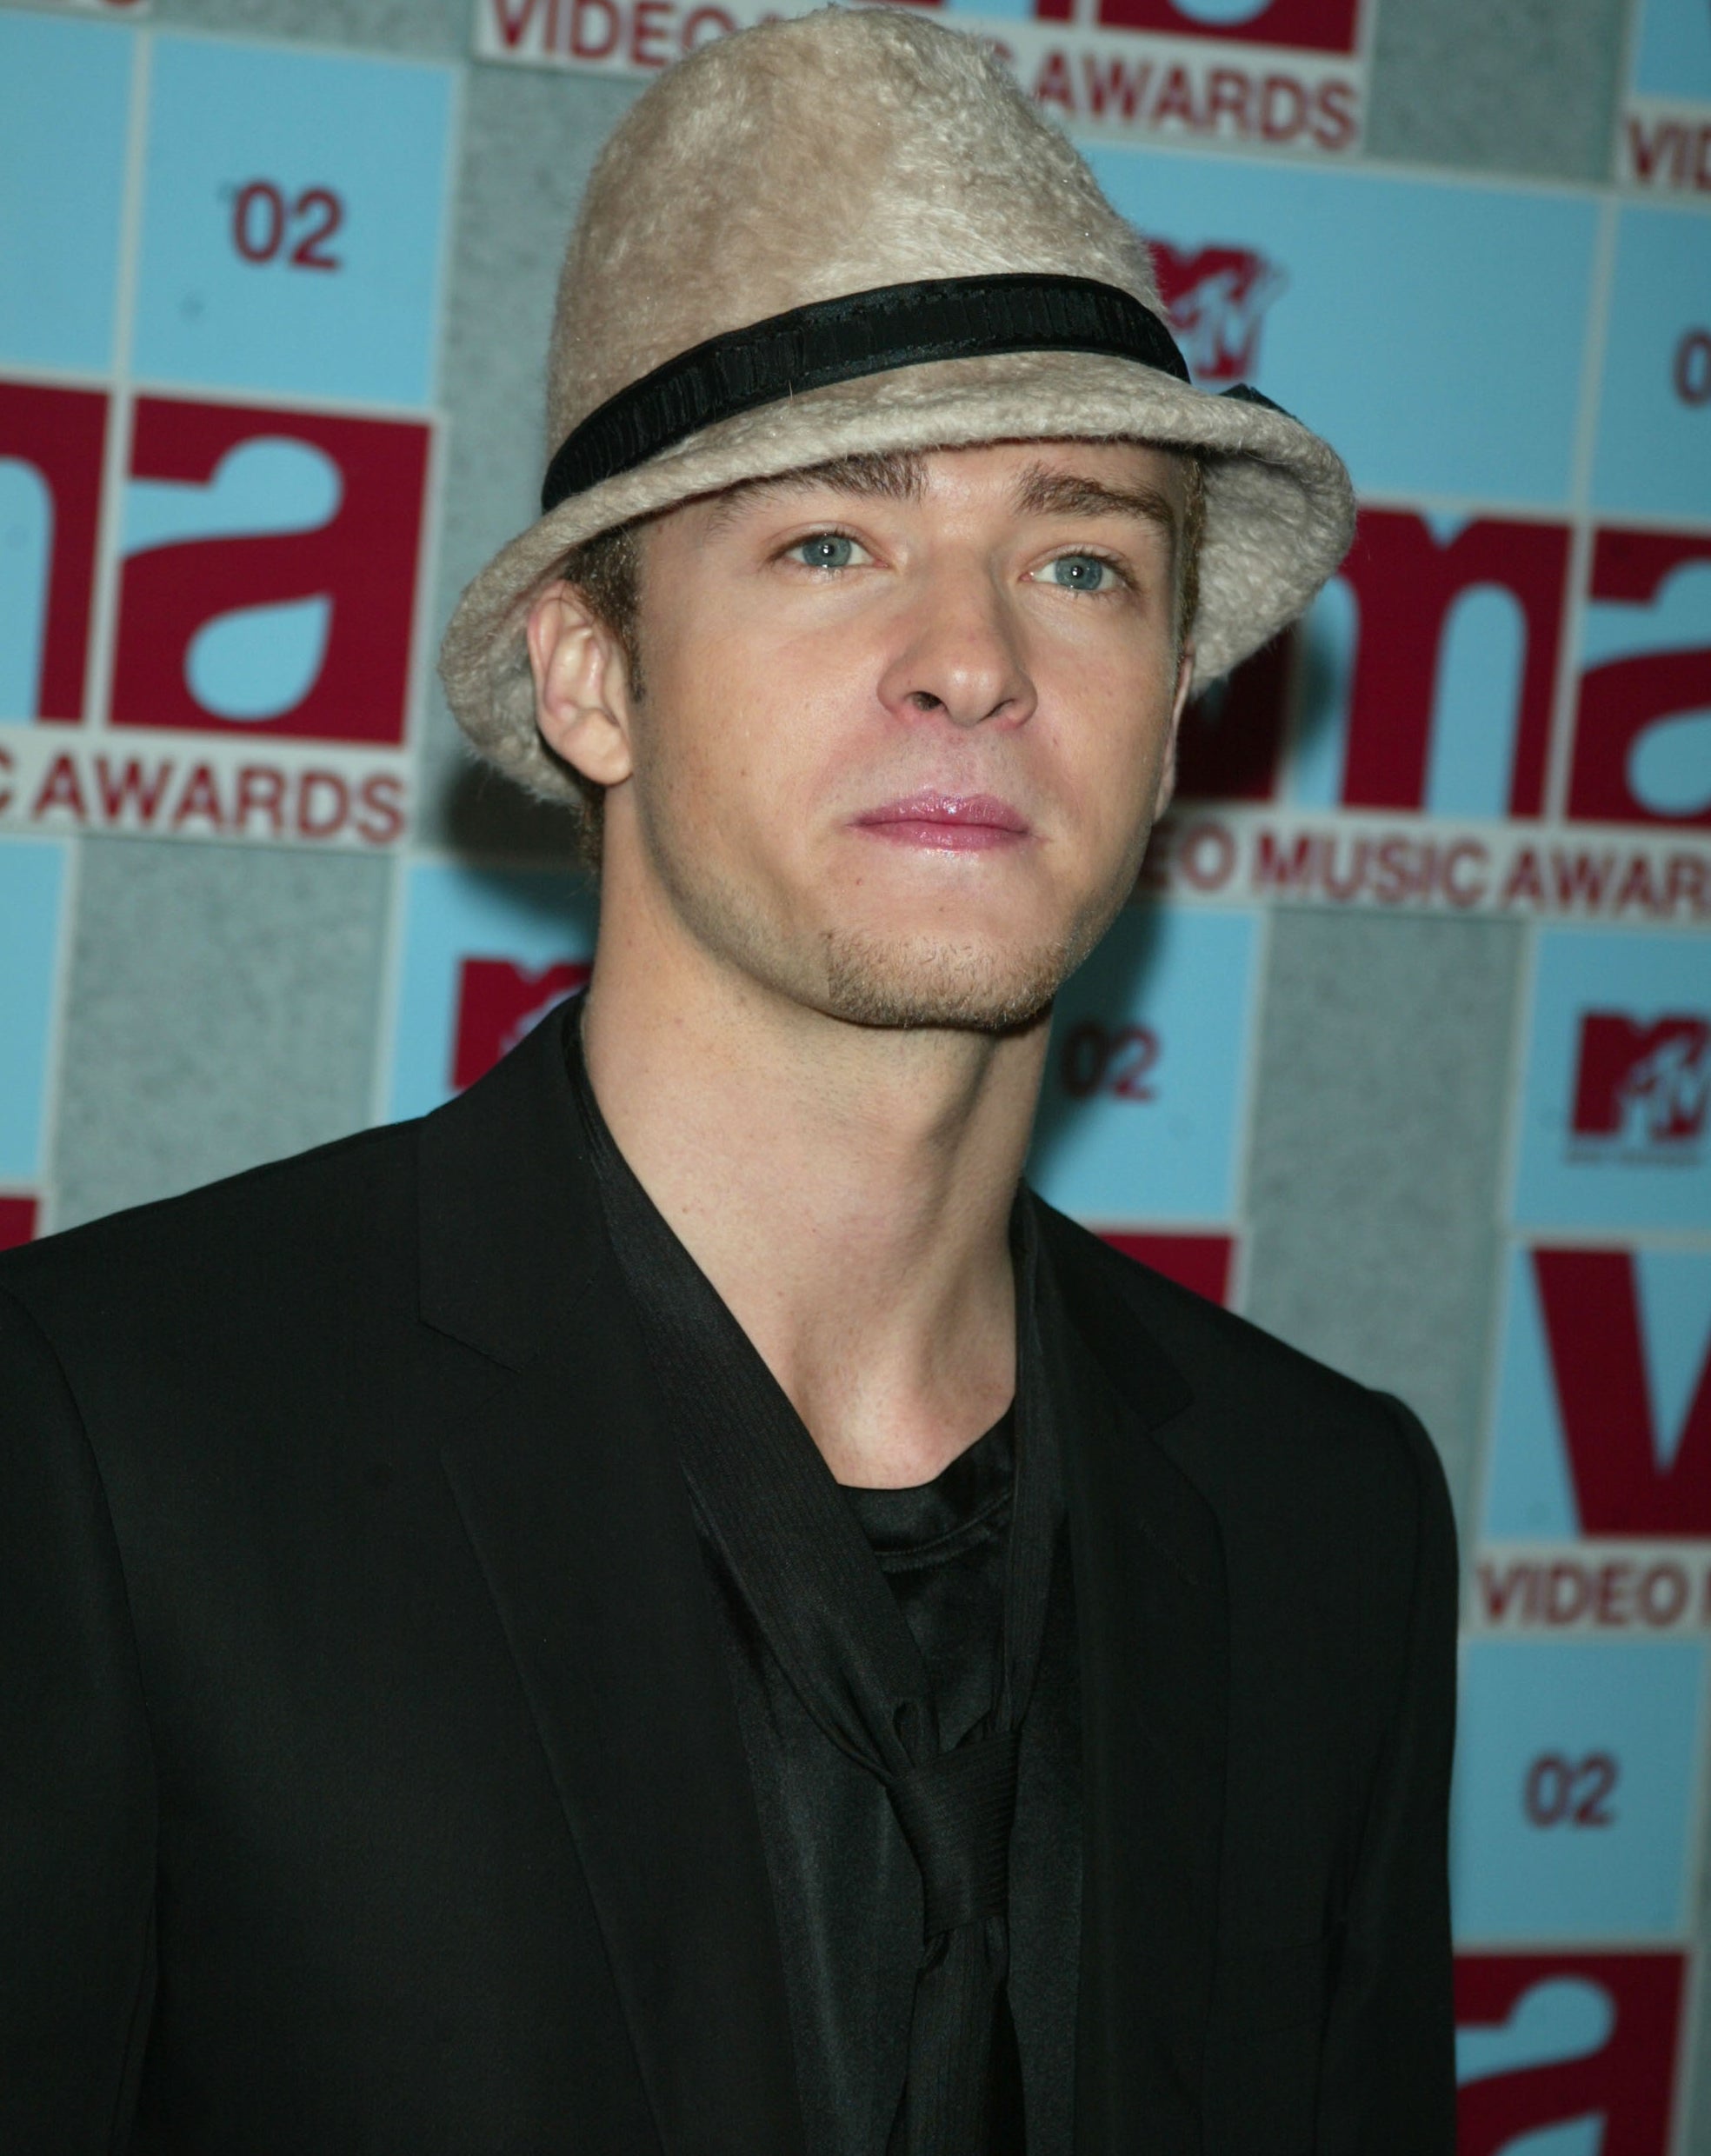 Close-up of Justin wearing a thin-brimmed hat